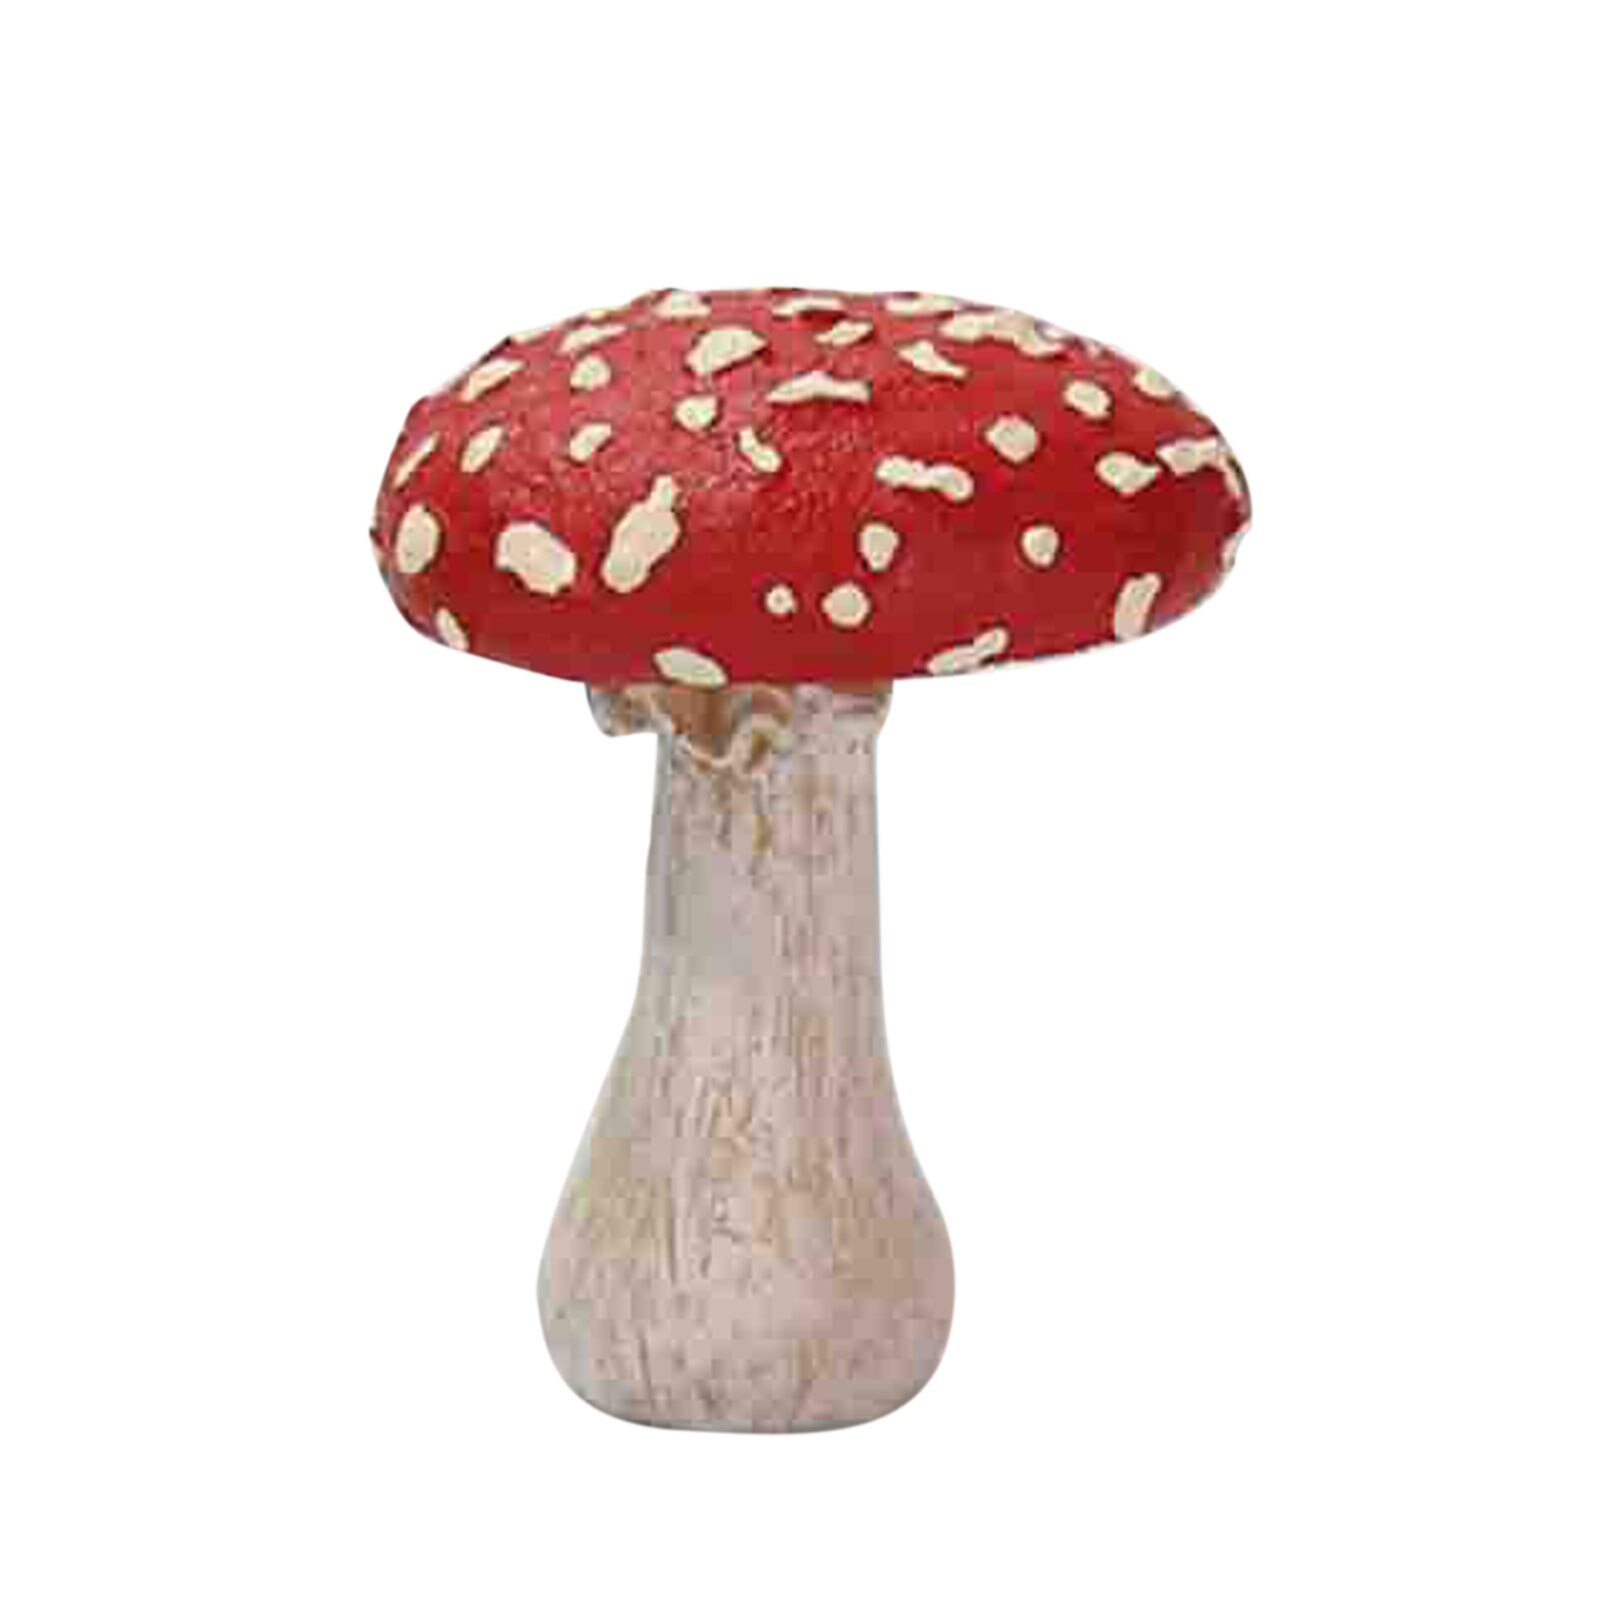 Simulation Resin Mushroom Garden Decoration Mushroom Statue perfect for home lawn or garden exquisite and compact